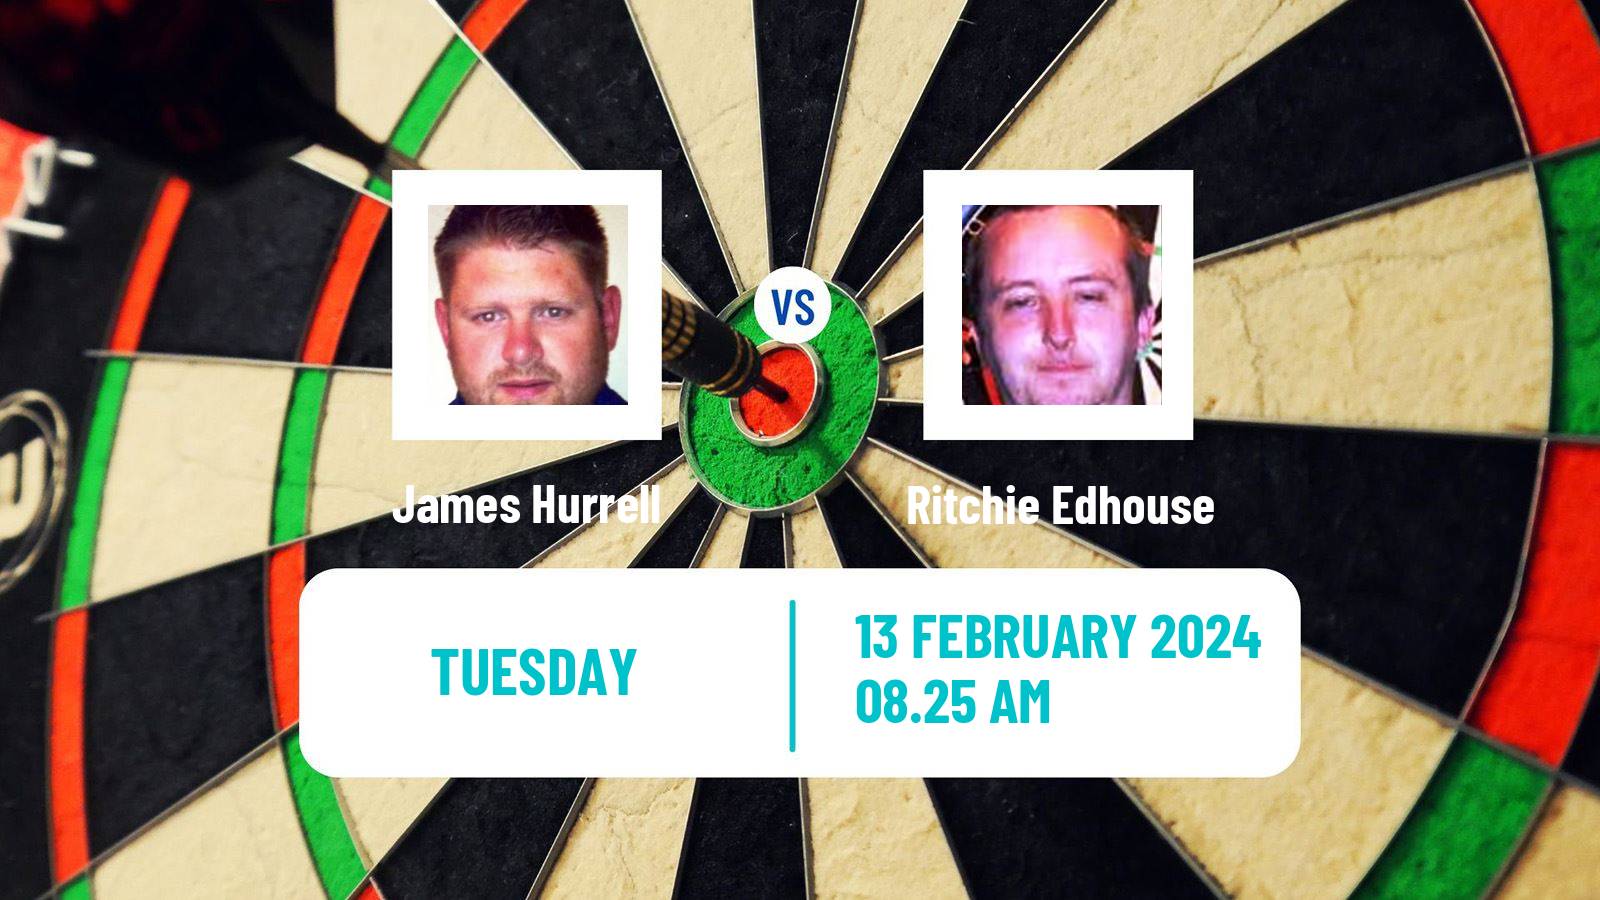 Darts Players Championship 2 James Hurrell - Ritchie Edhouse